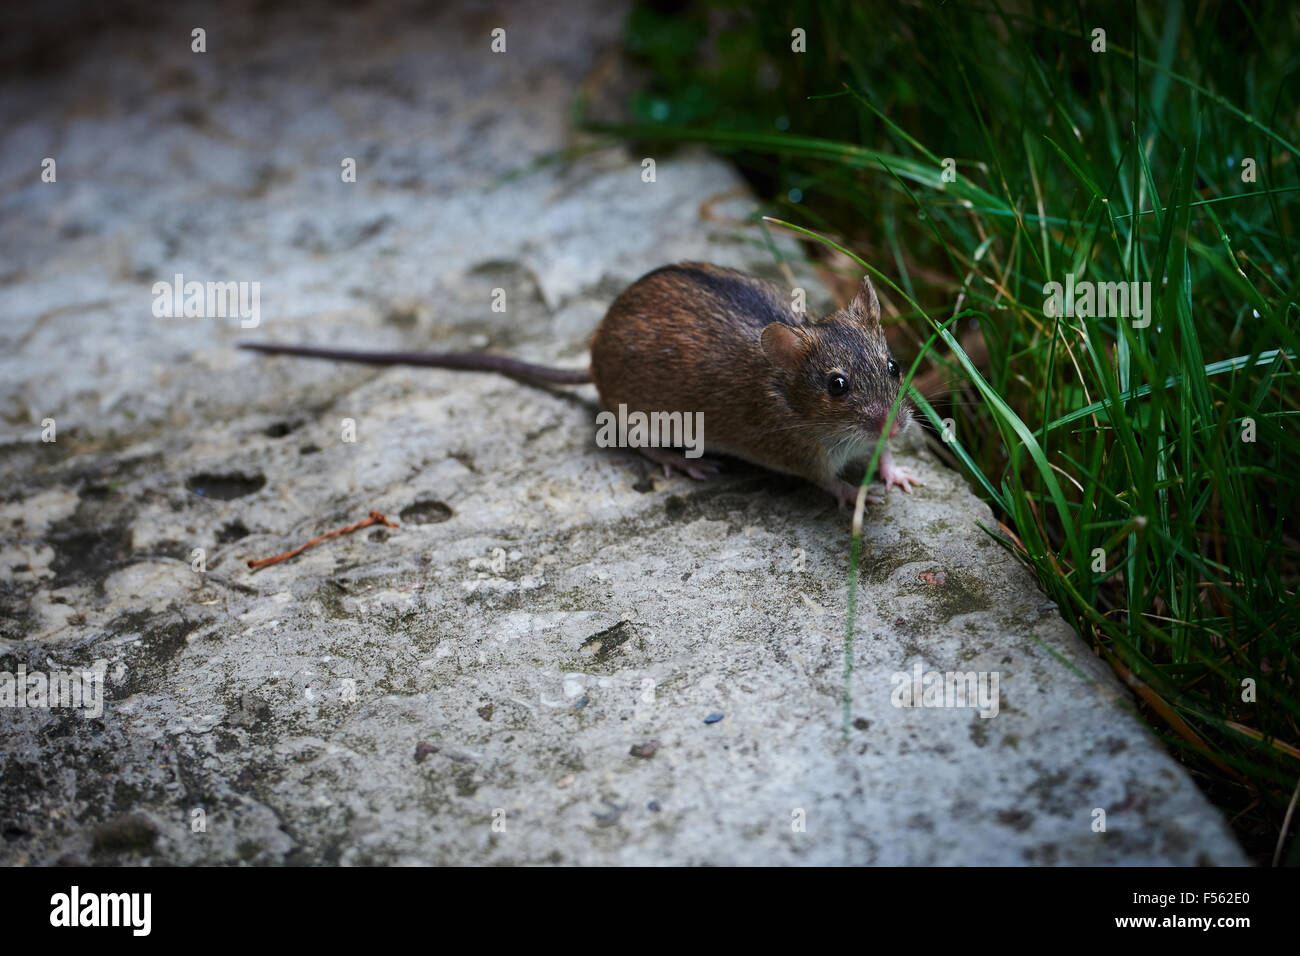 19.07.2015, Berlin, Berlin, Germany  - The fire mouse (Apodemus agrarius) counts within the family of muridae (Muridae) to the kind of wood mice (Apodemus). In English, the Fire Mouse Striped field mouse is called. 00Y150719D002CAROEX.JPG - NOT for SALE in G E R M A N Y, A U S T R I A, S W I T Z E R L A N D [MODEL RELEASE: NOT APPLICABLE, PROPERTY RELEASE: NO (c) caro photo agency / Teich, http://www.caro-images.pl, info@carofoto.pl - In case of using the picture for non-journalistic purposes, please contact the agency - the picture is subject to royalty!] Stock Photo